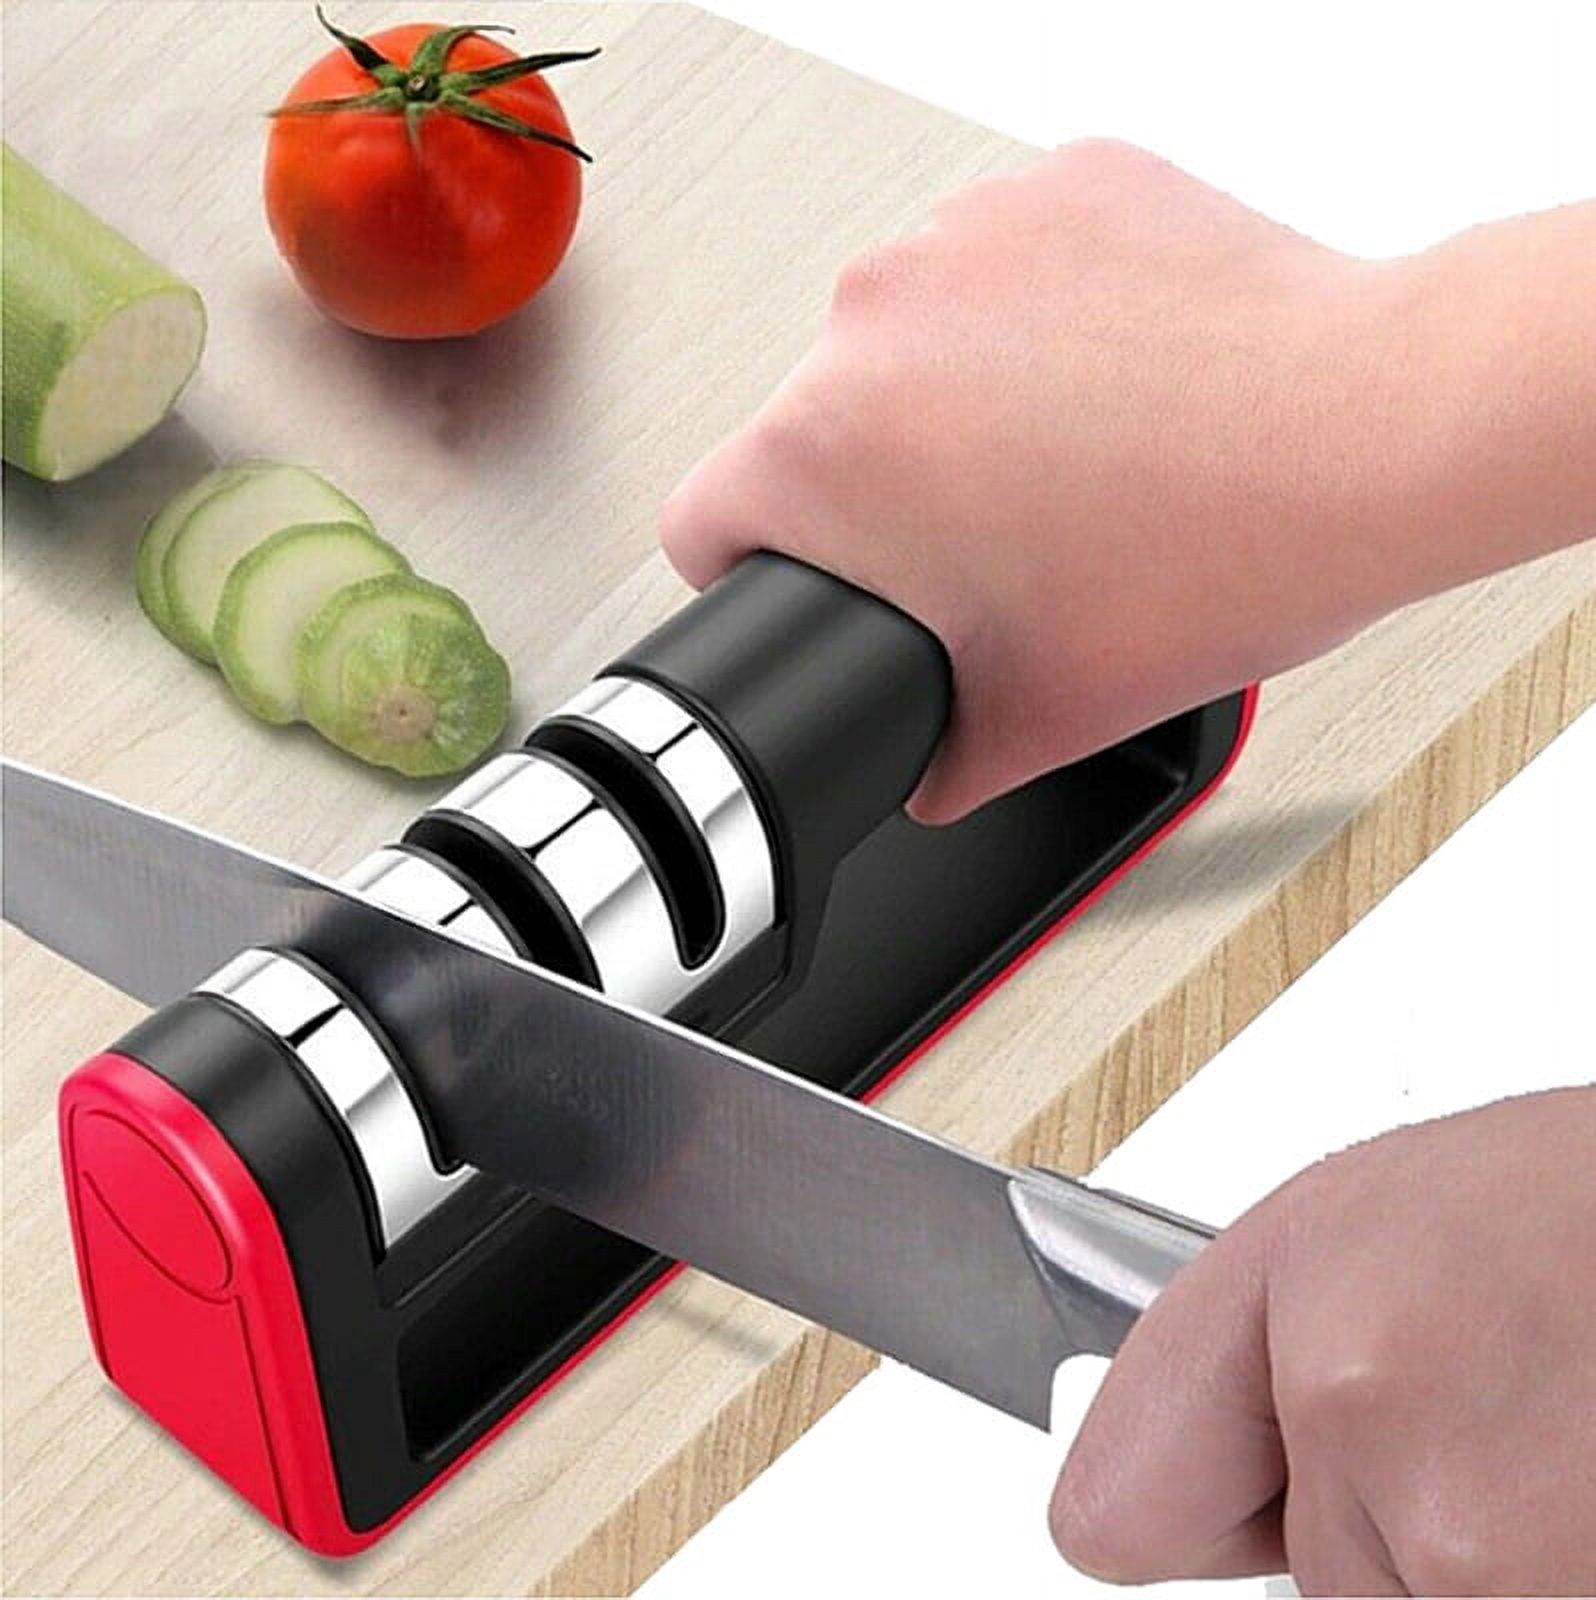 SENKEN 3-in-1 Kitchen Knife Sharpener, Adjustable Angle from 14 to 24  Degrees for Japanese & German Knives, 3 Stages for Sharpening & Honing,  Includes